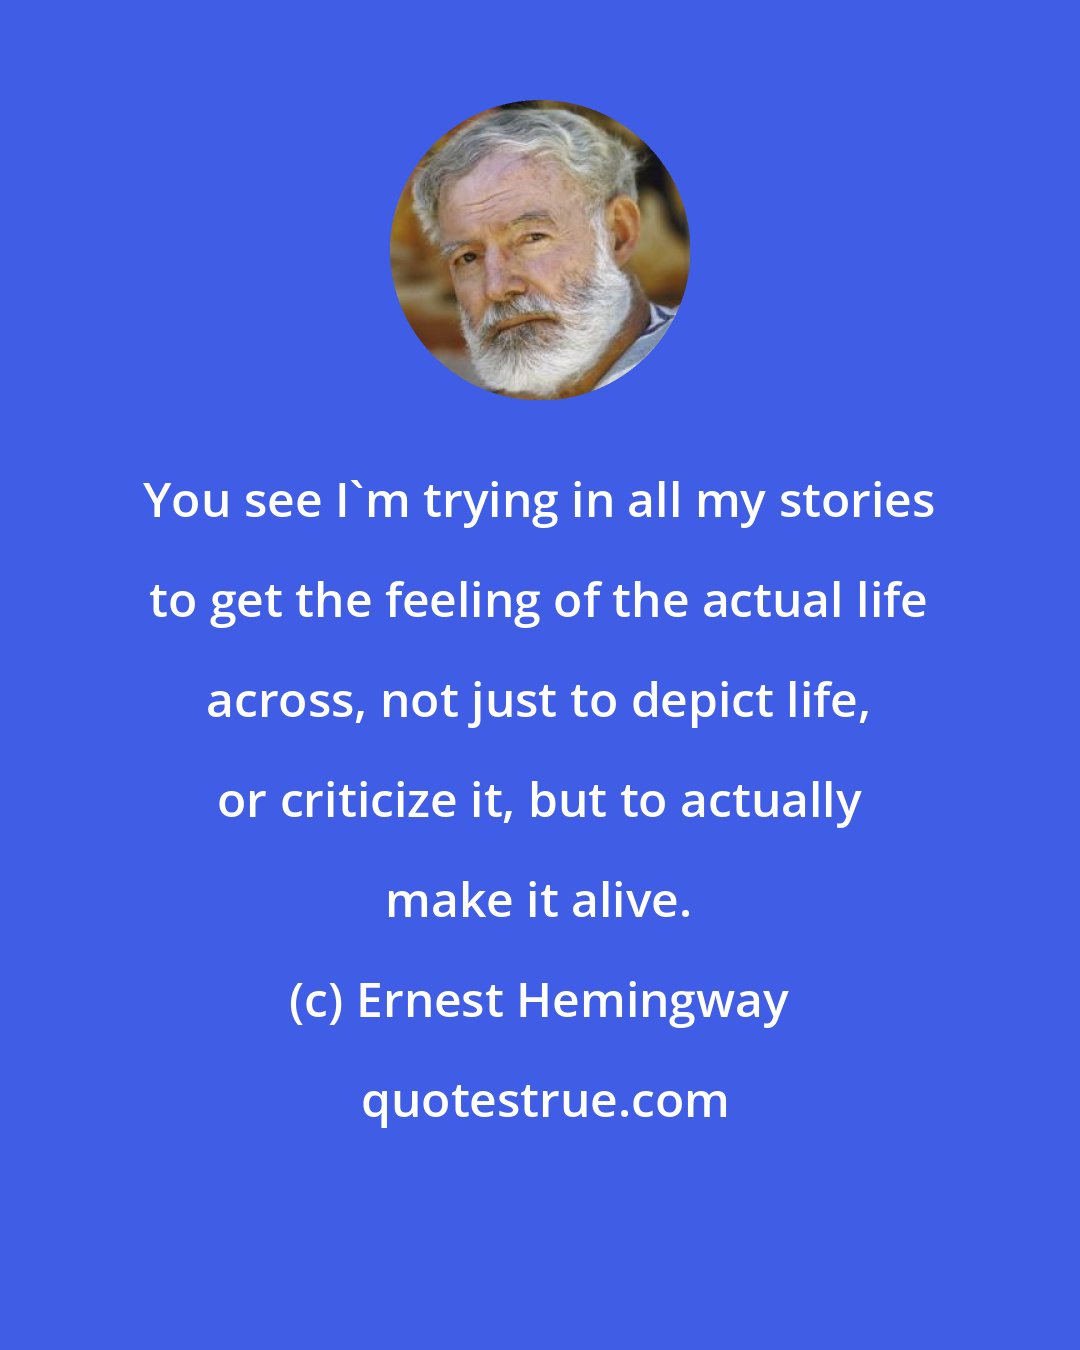 Ernest Hemingway: You see I'm trying in all my stories to get the feeling of the actual life across, not just to depict life, or criticize it, but to actually make it alive.